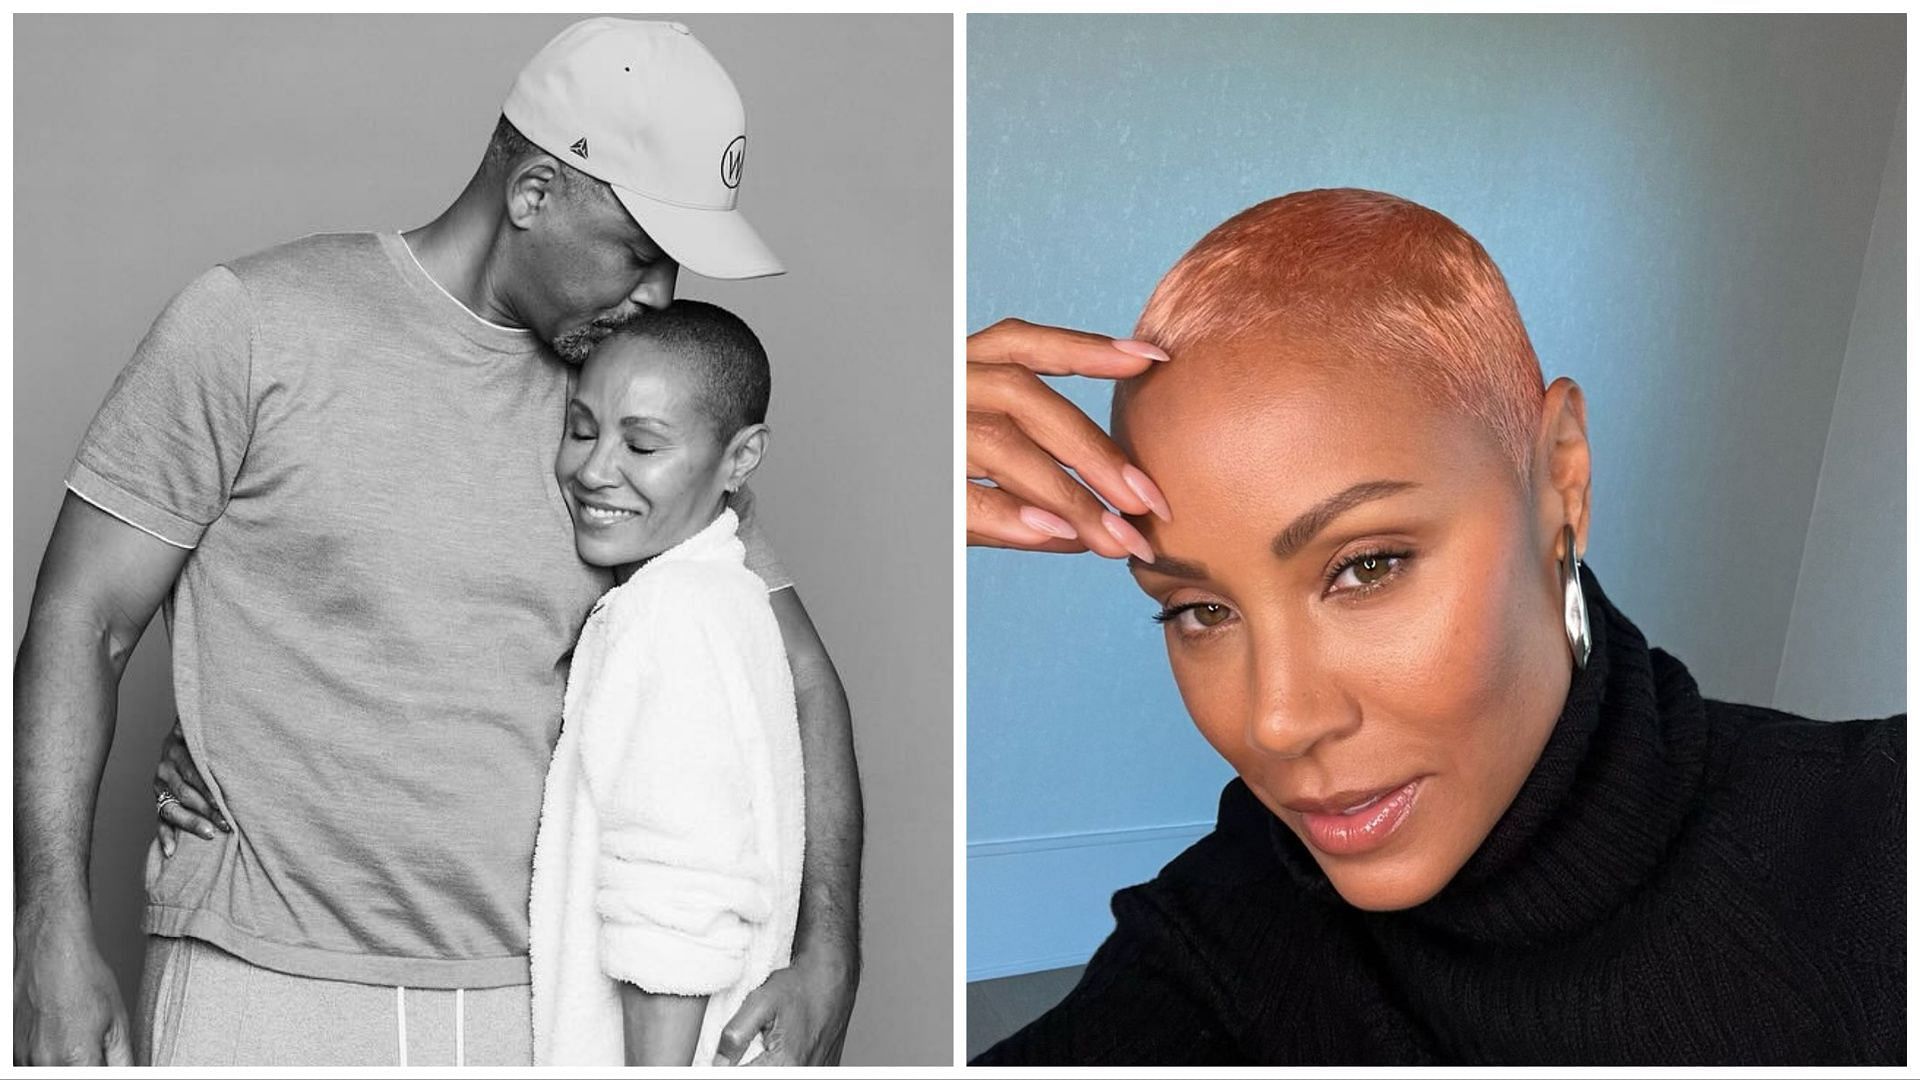 Jada&#039;s recent thoughts on her marriage sparked disbelief among netizens (Image via Facebook / Will Smith / Instagram / jadapinkettsmith)